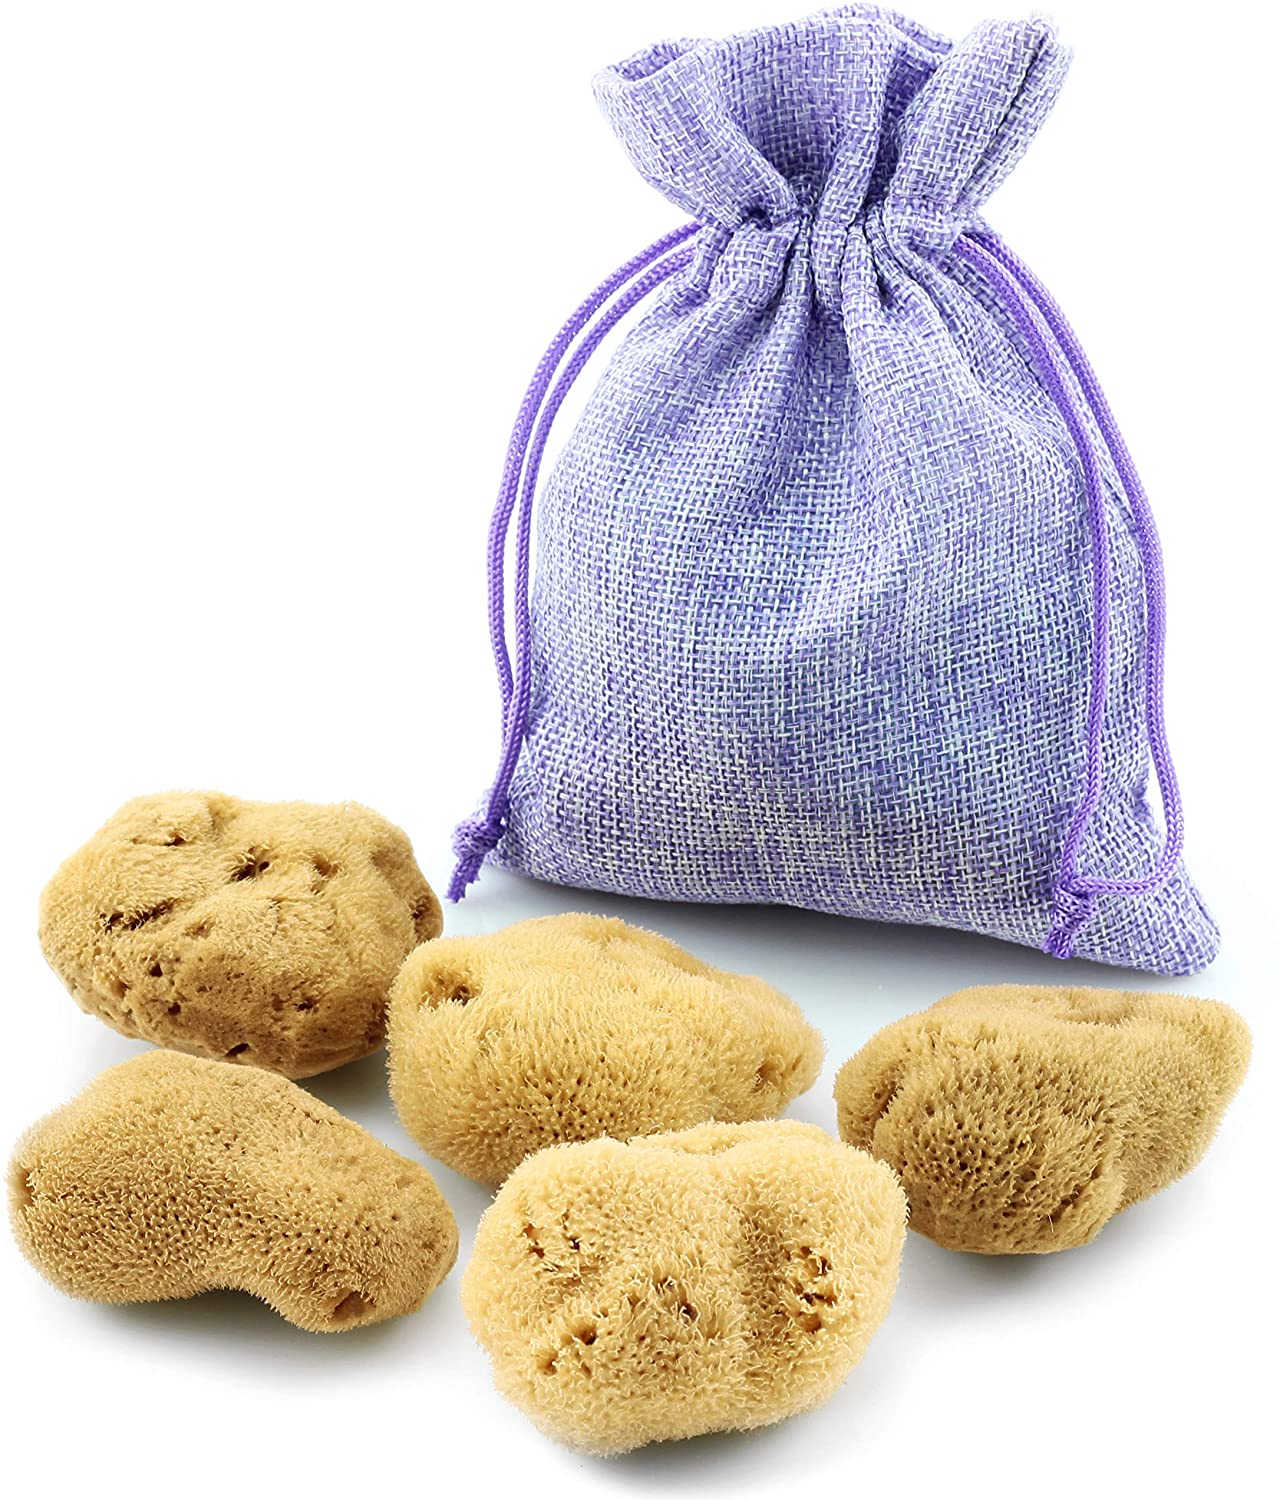 sponges eco-friendly products